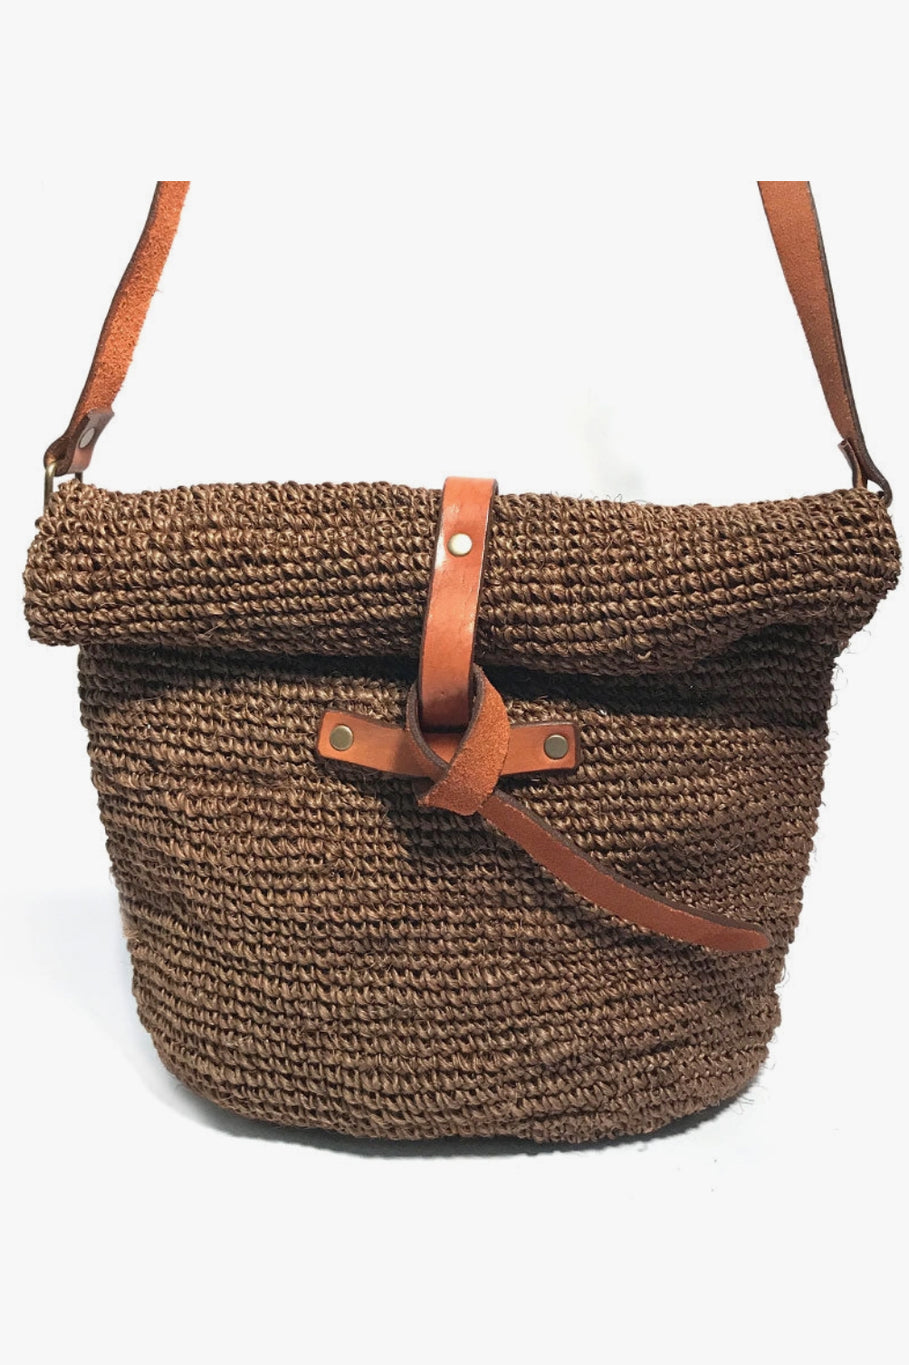 Crocheted Crossbody Bag with Leather Tie